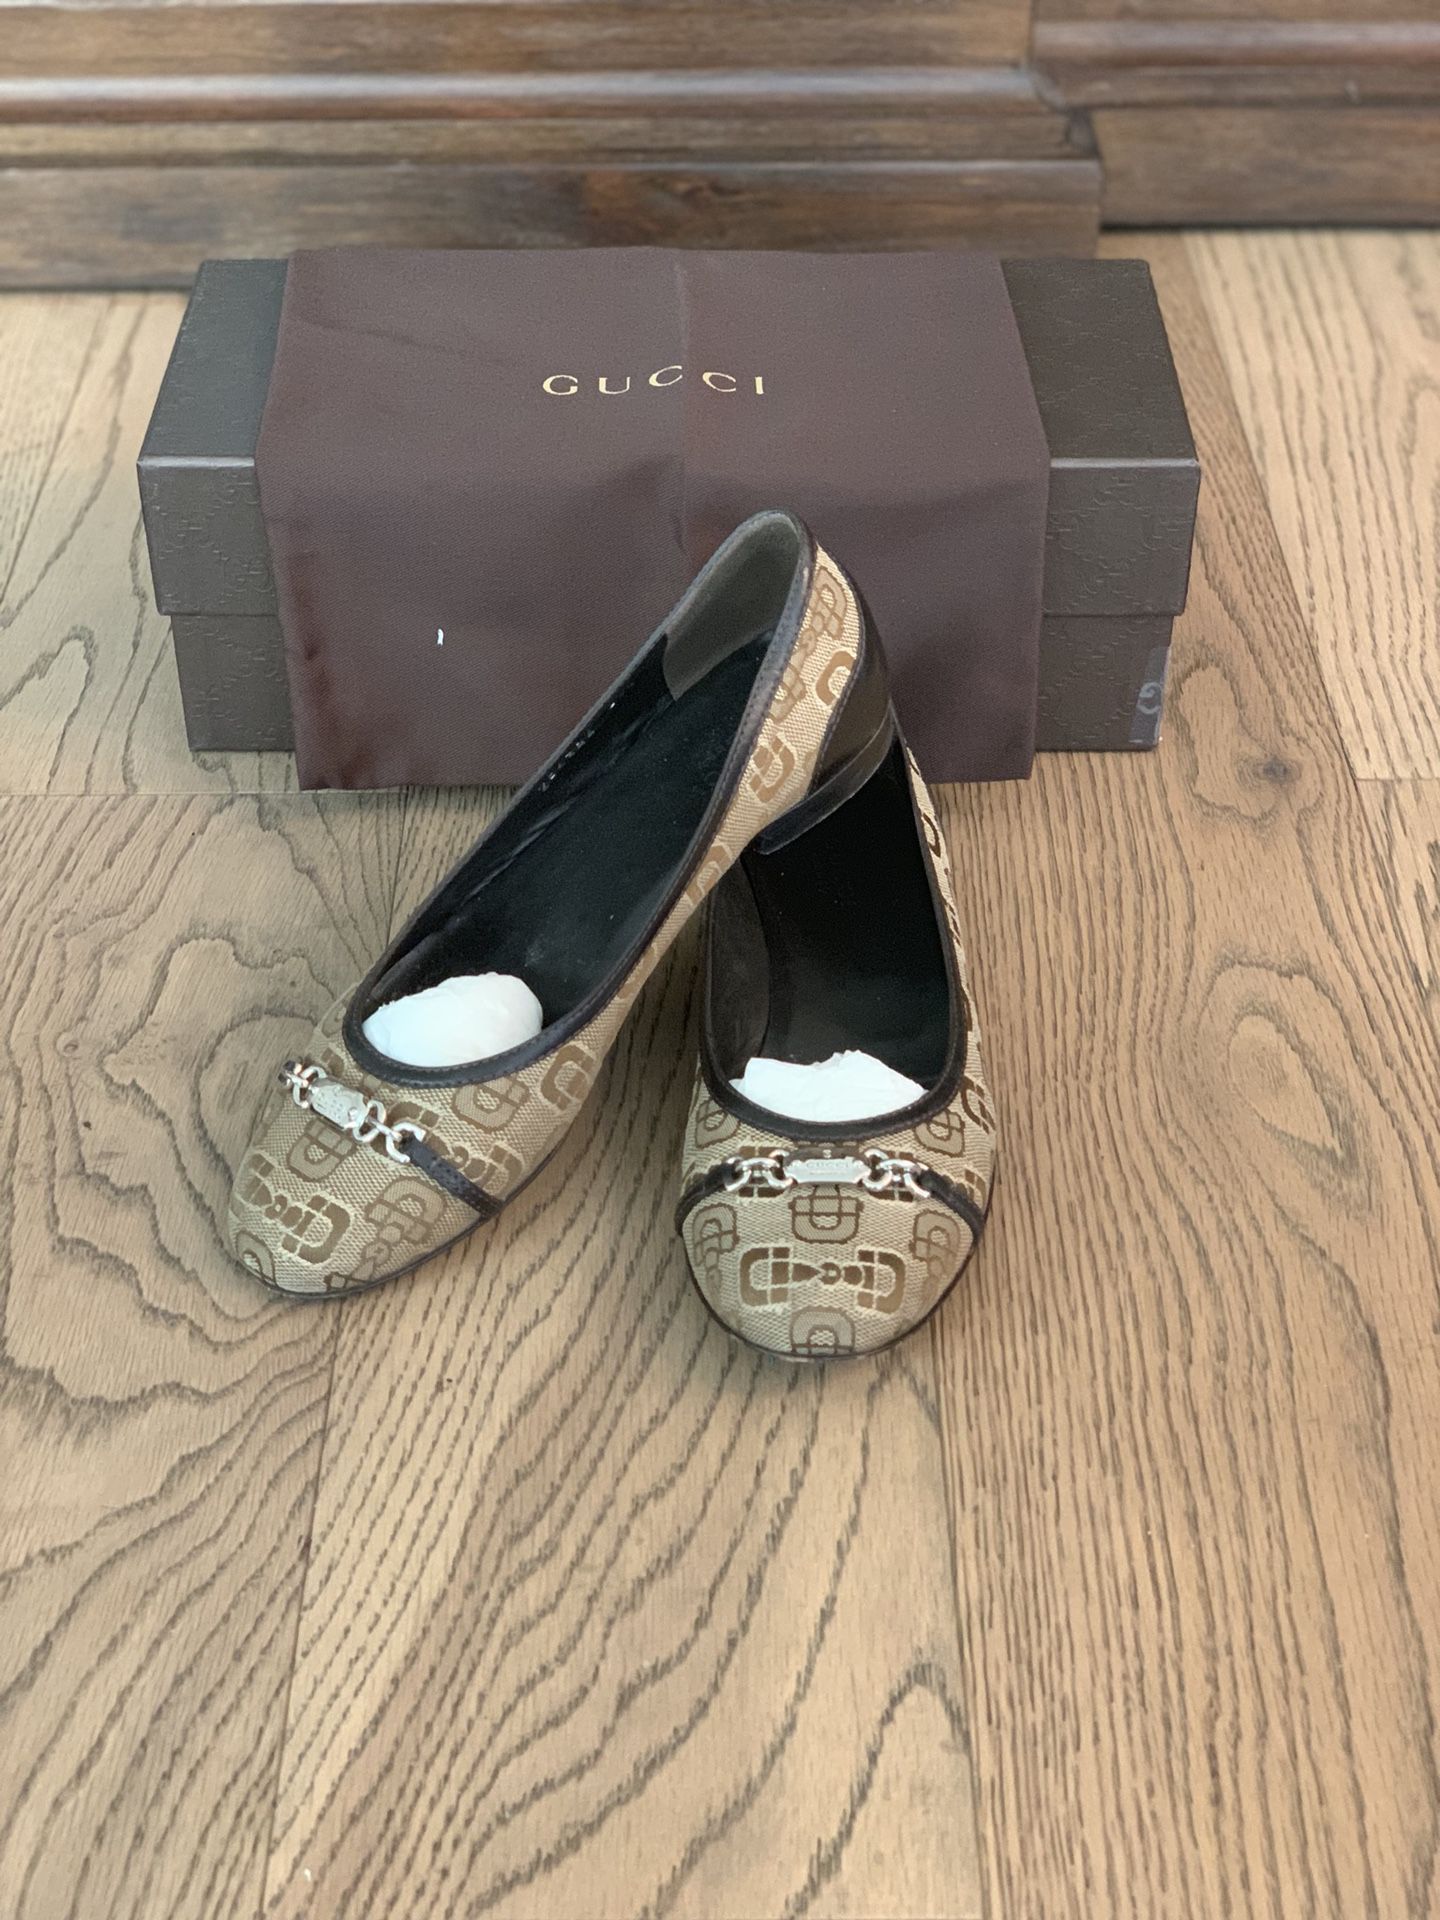 Gucci women’s shoes loafers flats size 6.5